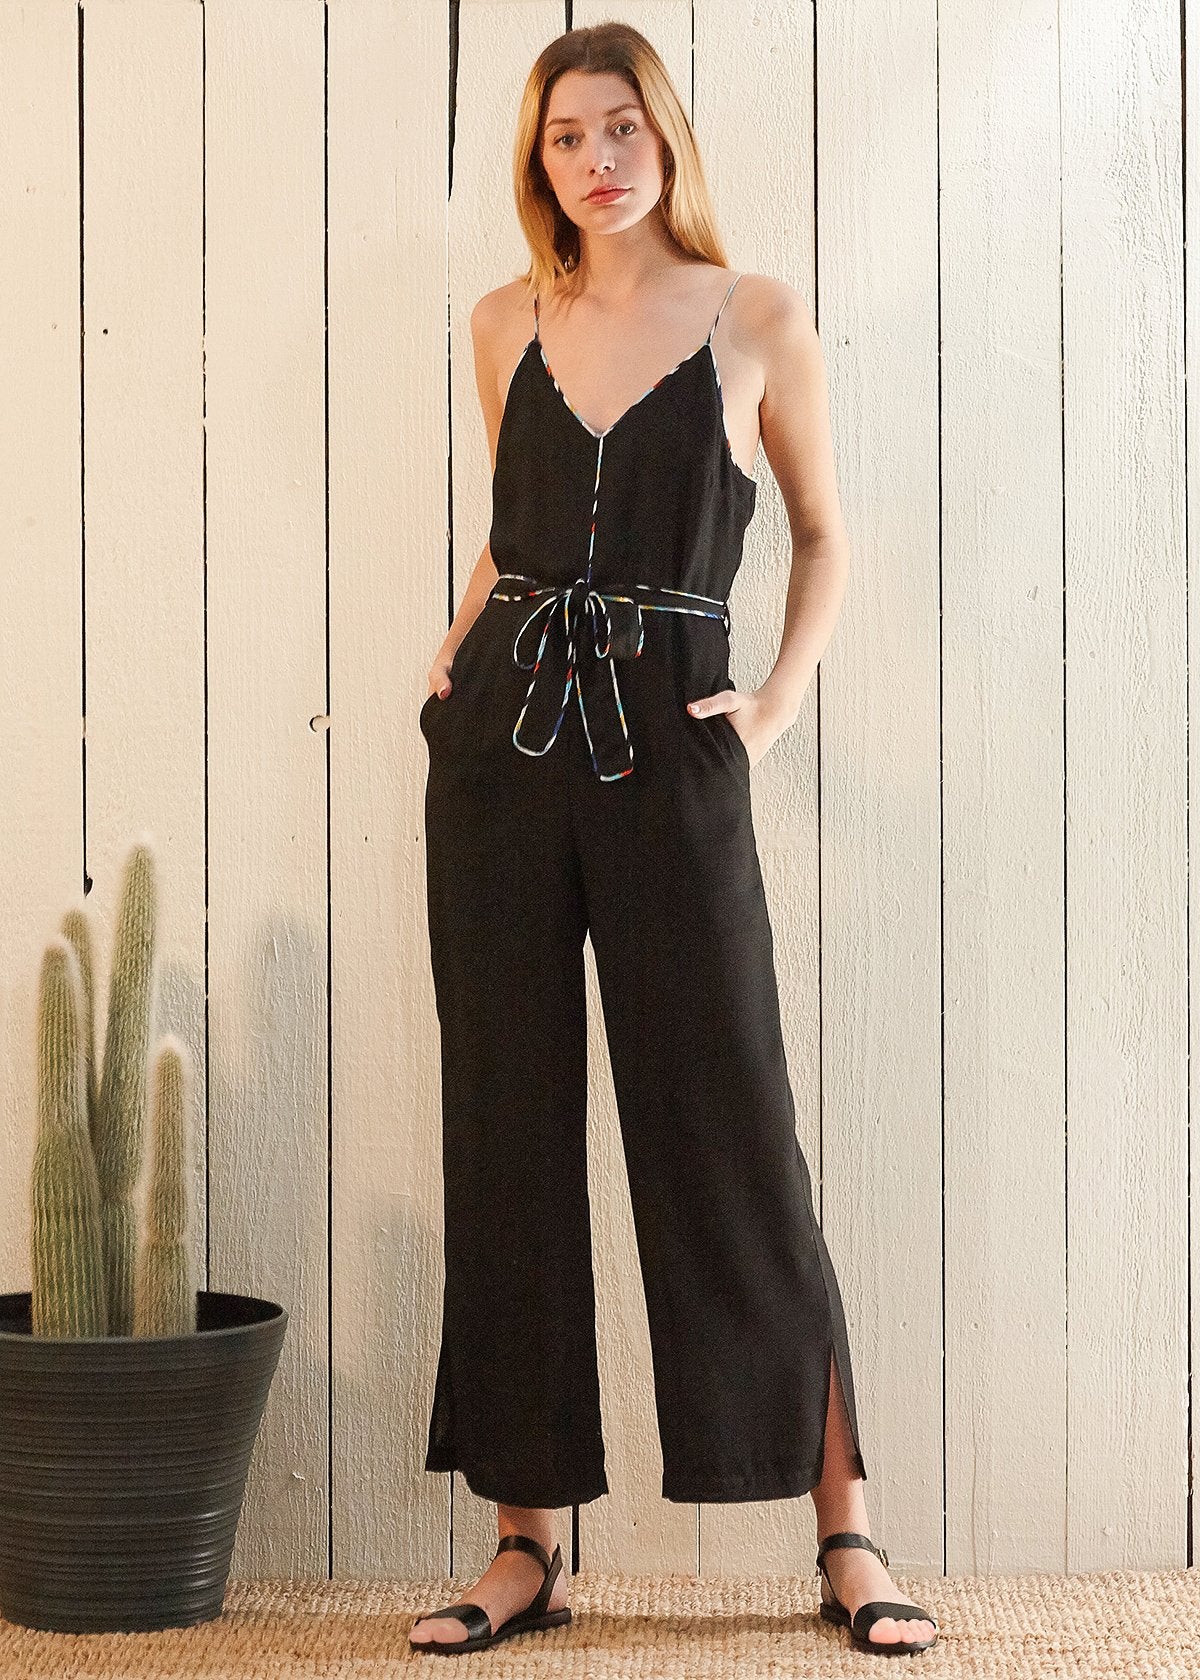 Multi-Color Binding Jumpsuit: A fashionable one-piece outfit featuring colorful binding details, adding a vibrant and stylish touch to your ensemble.